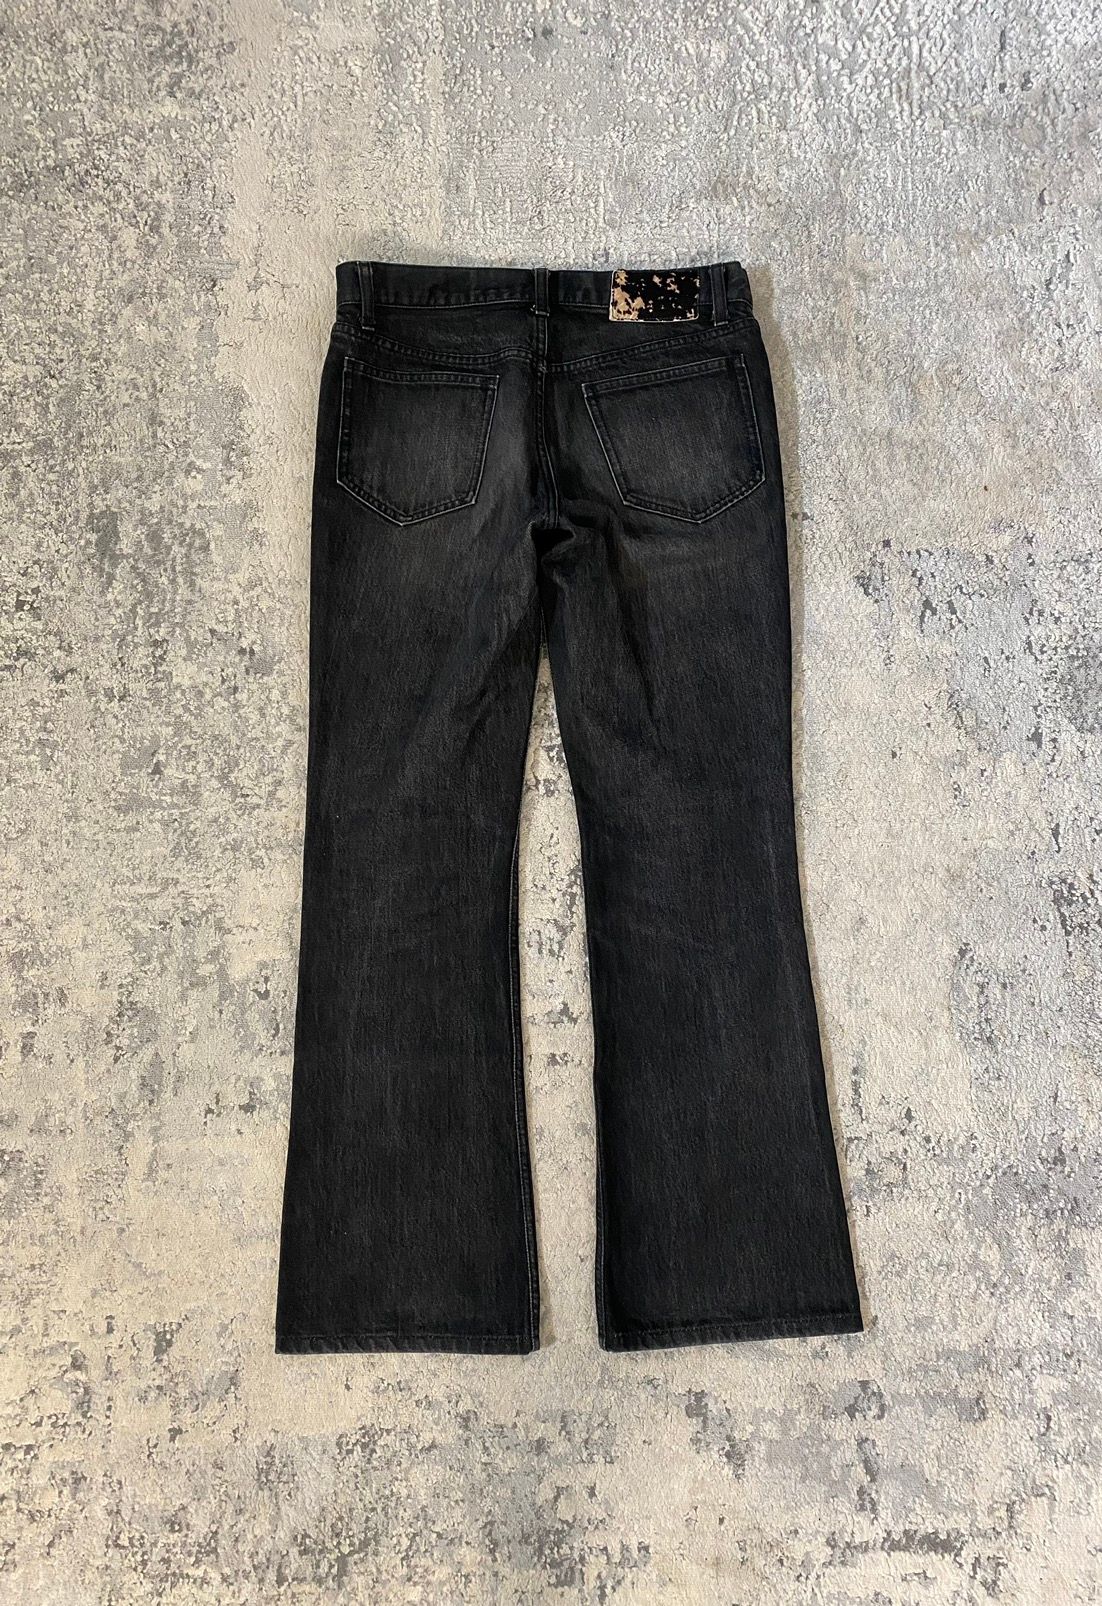 Shellac [SOLD]Shellac Faded Black Bootcut Jeans Size US 30 / EU 46 - 1 Preview